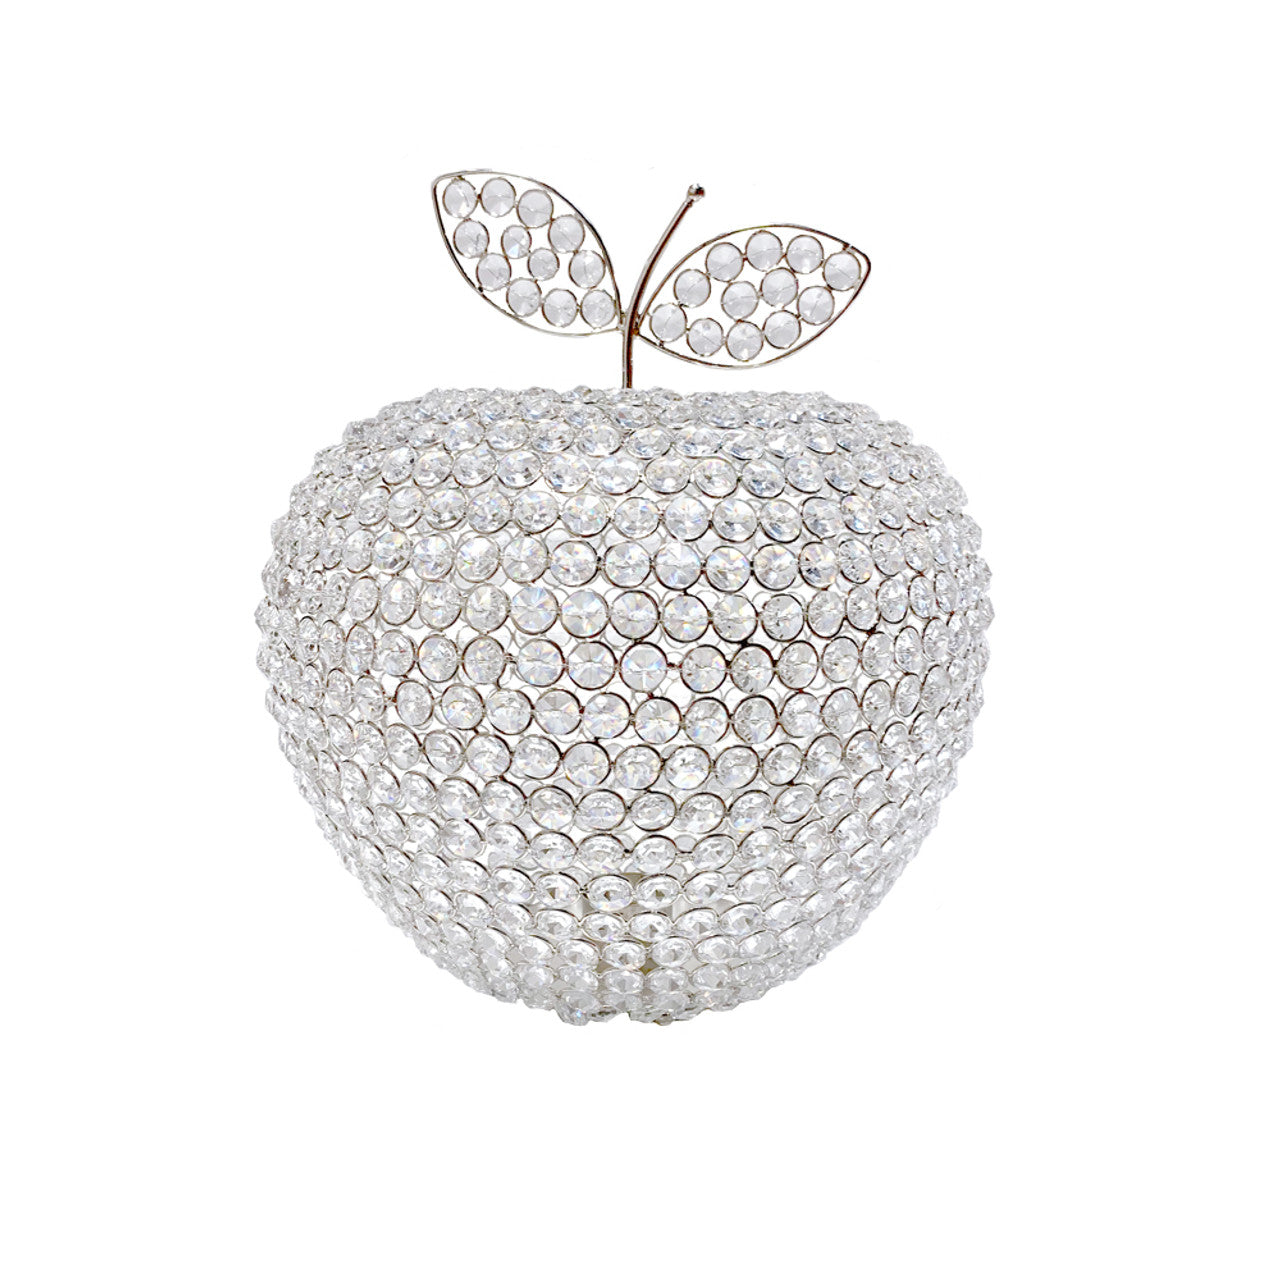 14" Silver Faux Crystal Apple Sculpture